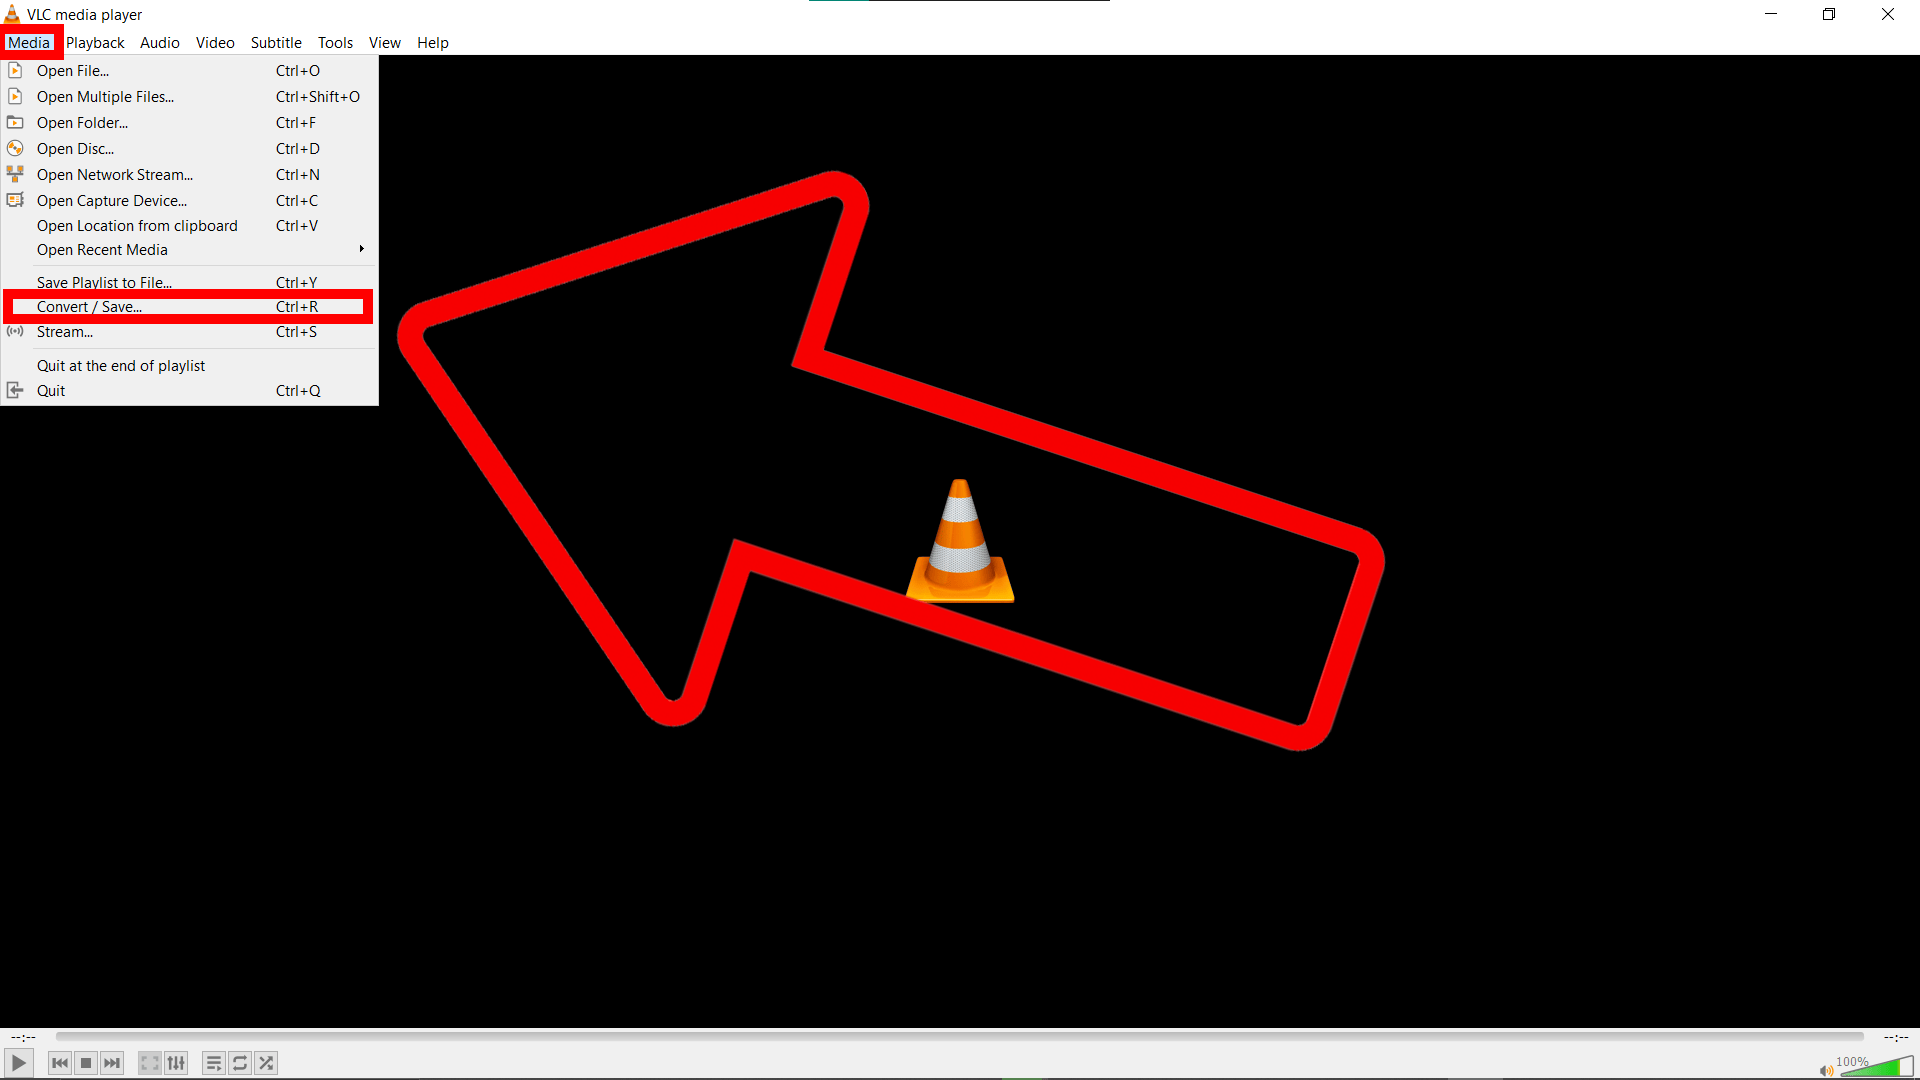 How To Reduce WAV File Size Using VLC: Step 2